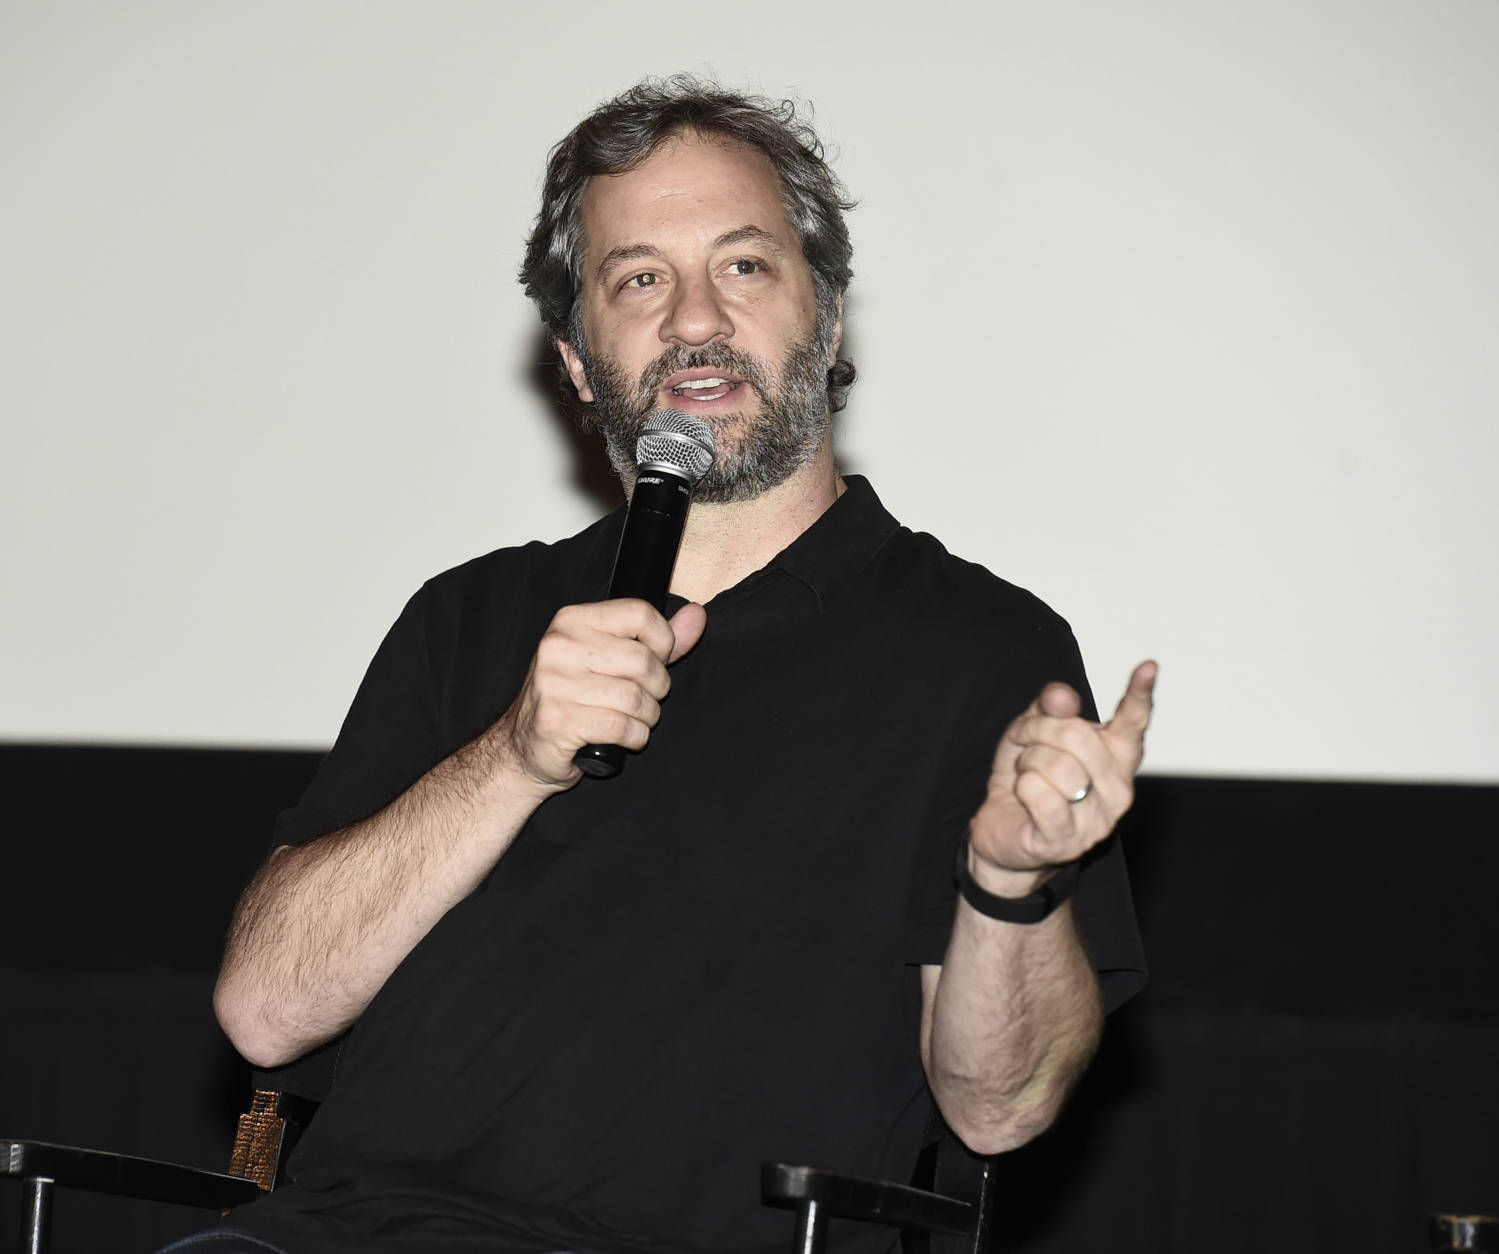 Executive producer Judd Apatow seen at a panel discussion following a Netflix screening of Love Season 1 at the Arclight Cinemas Hollywood on Tuesday, Nov. 1, 2016, in Los Angeles. (Photo by Dan Steinberg/Invision for Netflix/AP Images)